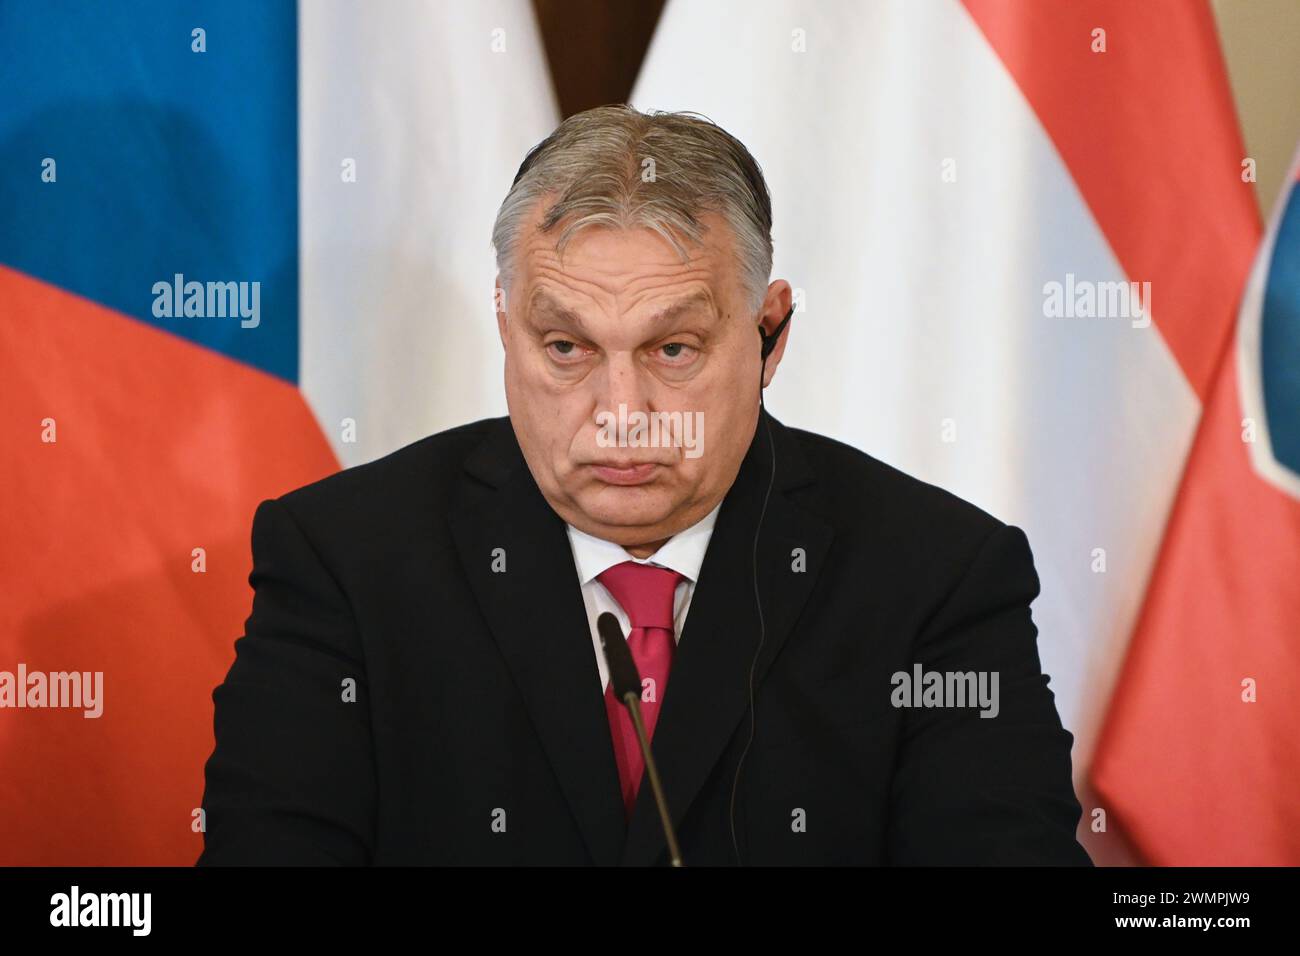 Hungarian prime minister, Viktor Orban is seen during a joint press conference after summit of the Visegrad Group (V4) in Prague. Prime ministers of the Czech Republic, Slovakia, Poland and Hungary meets at the summit of the Visegrad Group (V4) hosted by the current Czech presidency group. The main topics discussed during the summit are energy security, strategic agenda of European Union, support of Ukraine during Russian invasion. Visegrad group (V4) was established in 1991 and consists of 4 countries from Central Europe: Czech republic, Slovakia, Hungary and Poland. Stock Photo